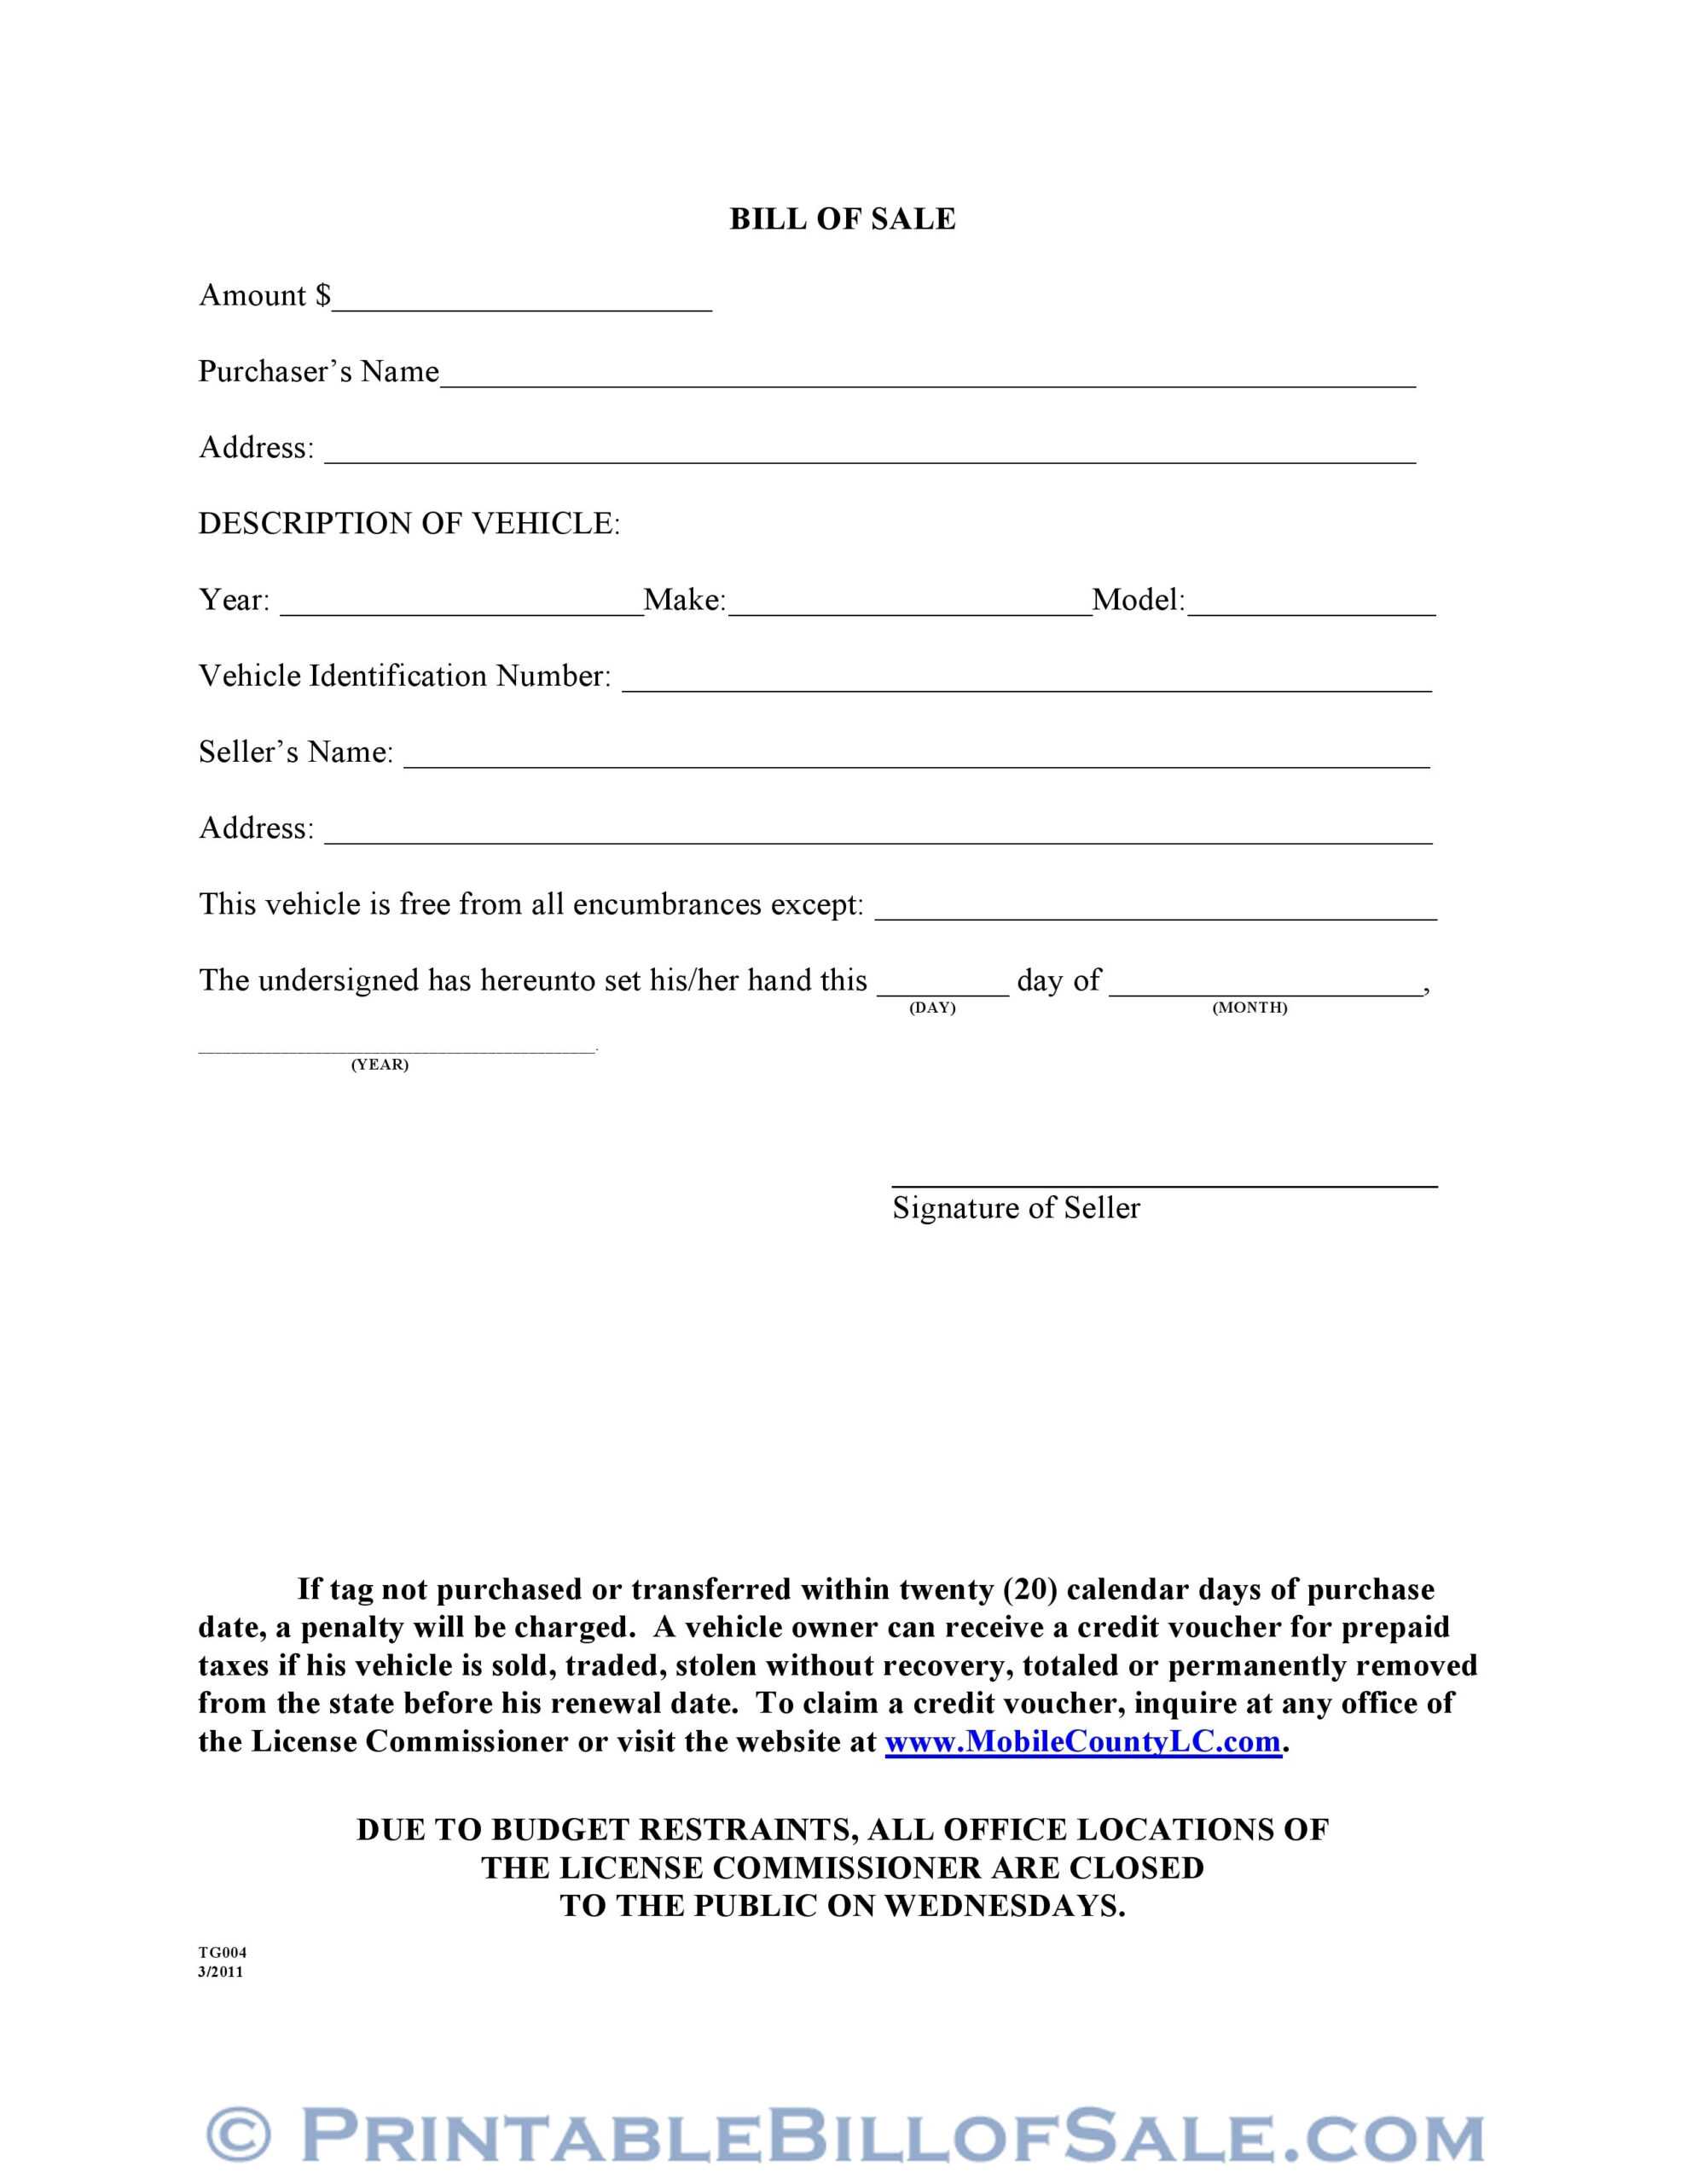 Free Mobile County Alabama Motor Vehicle Bill Of Sale Form Intended For Car Bill Of Sale Word Template